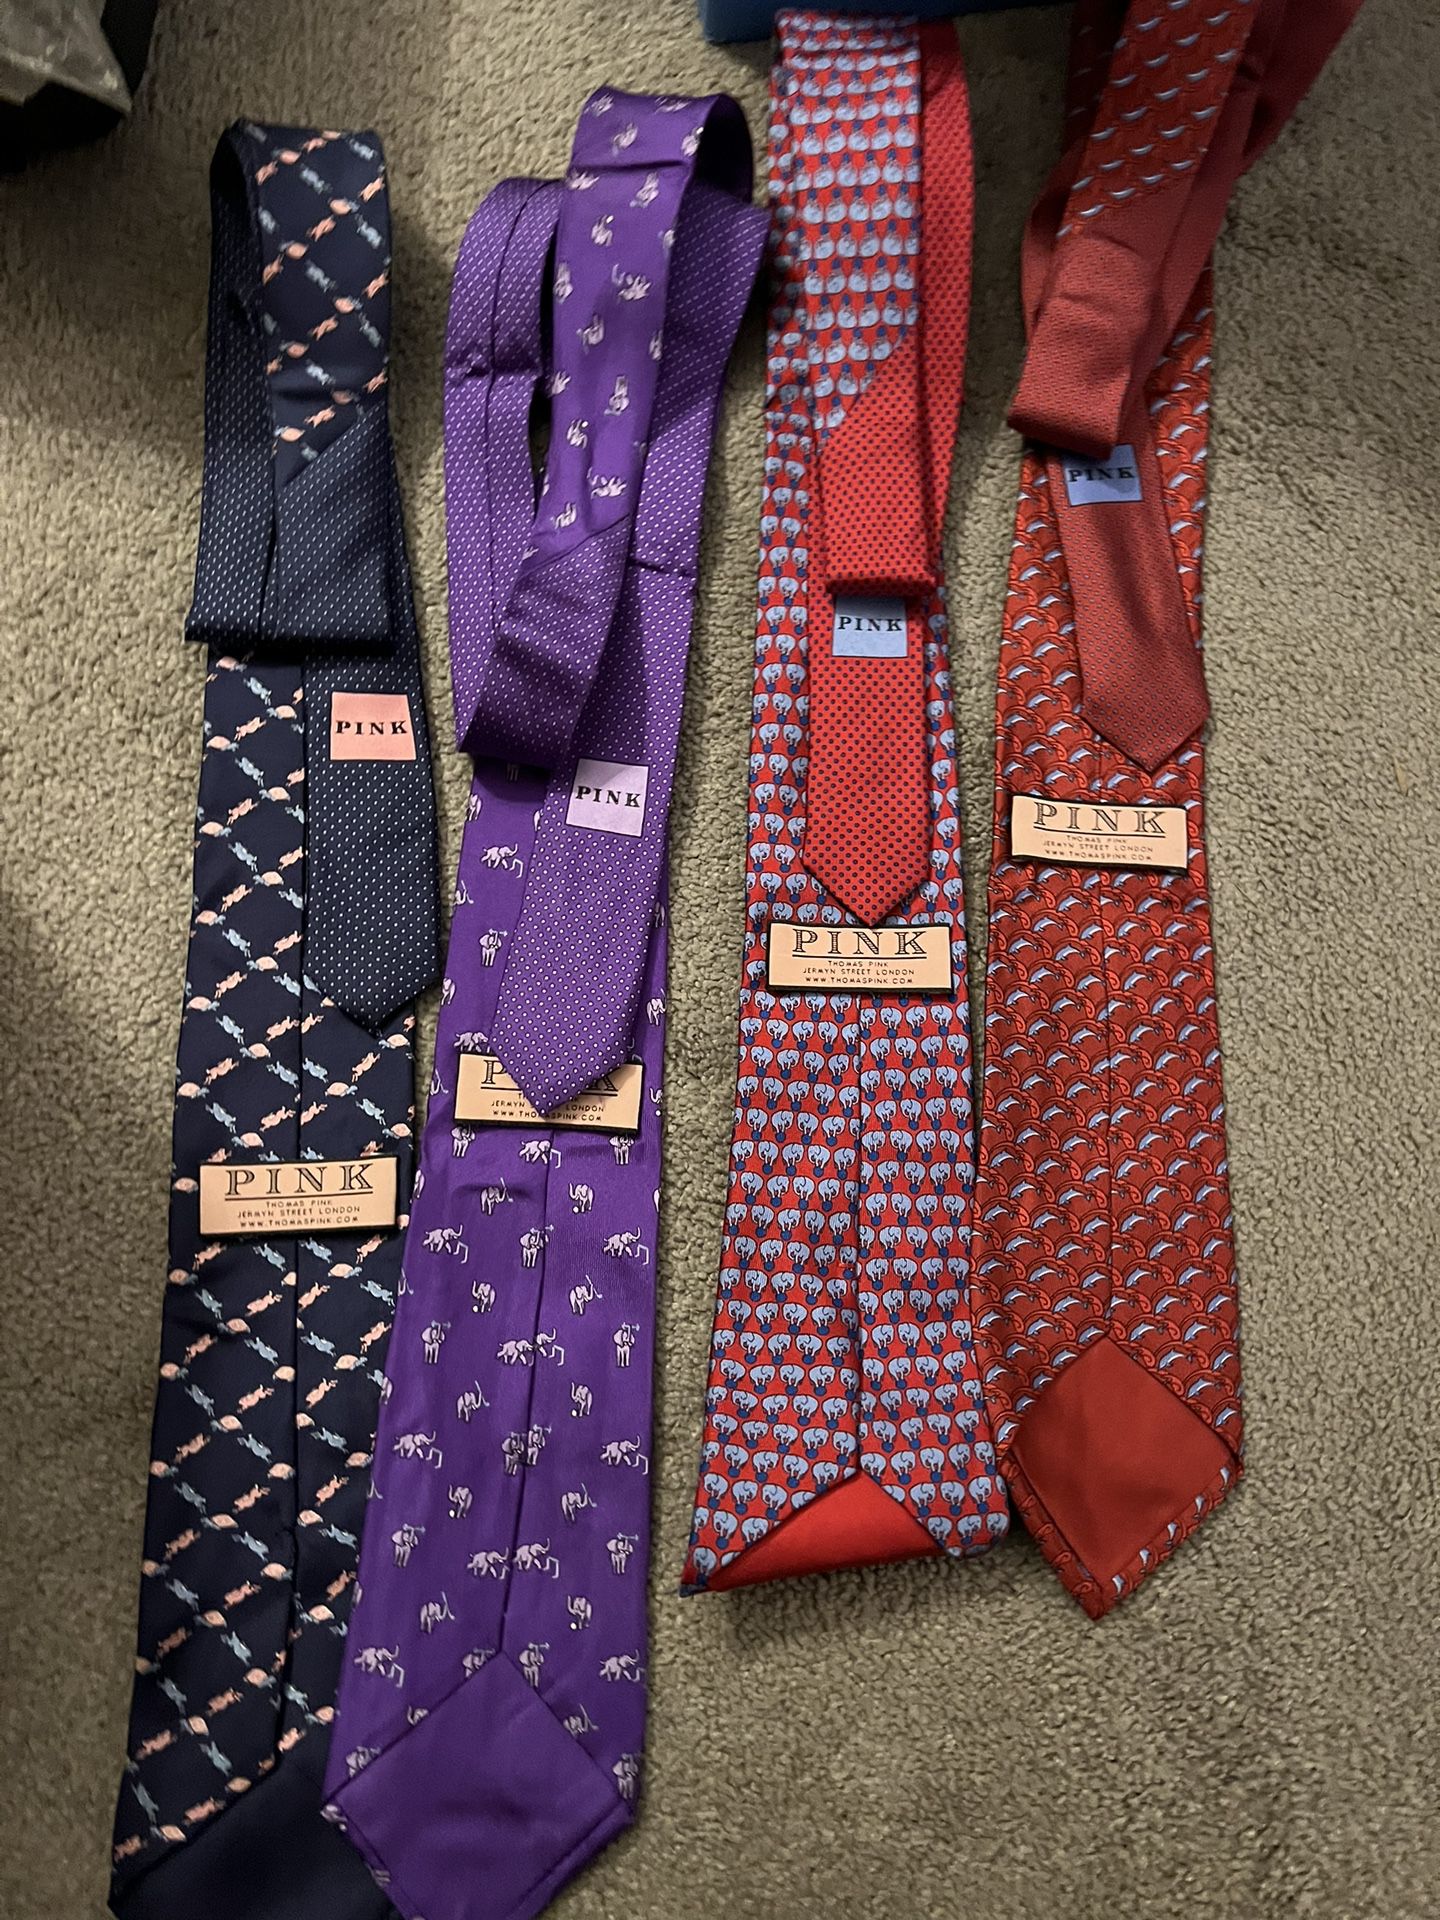 Thomas Pink Designer Men's Ties for Sale in Garden City South, NY - OfferUp